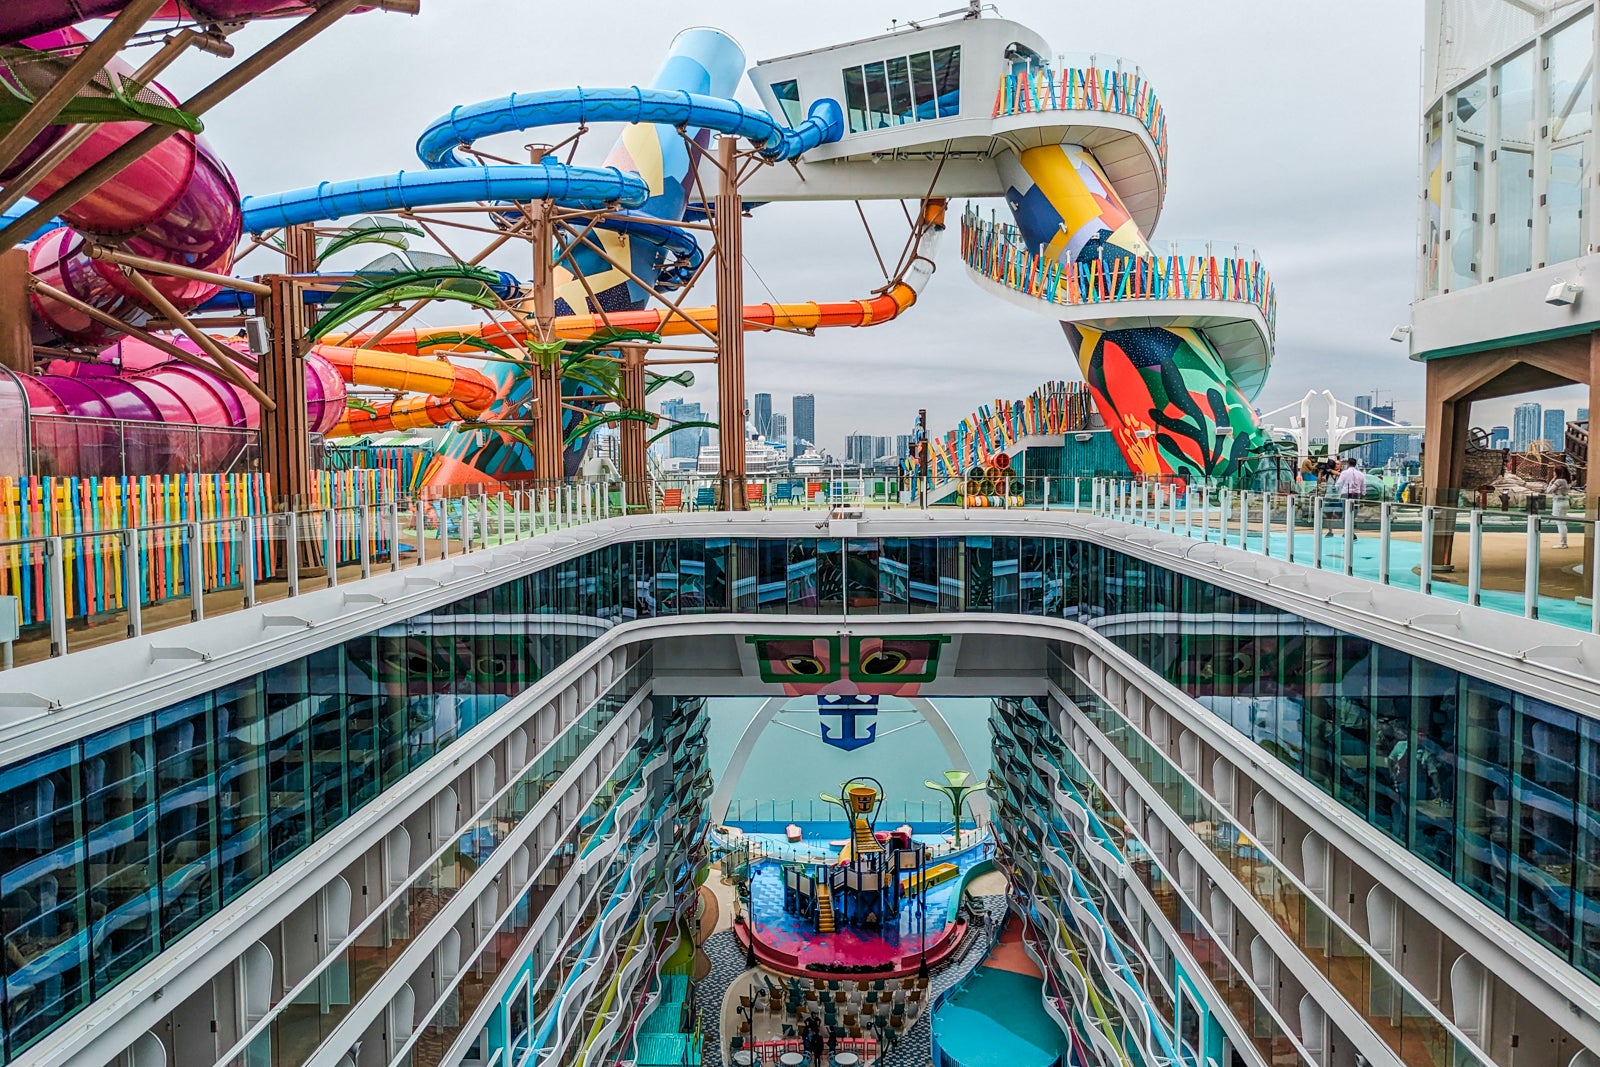 Icon of the Seas preview Photos of Royal Caribbean's newest ship The